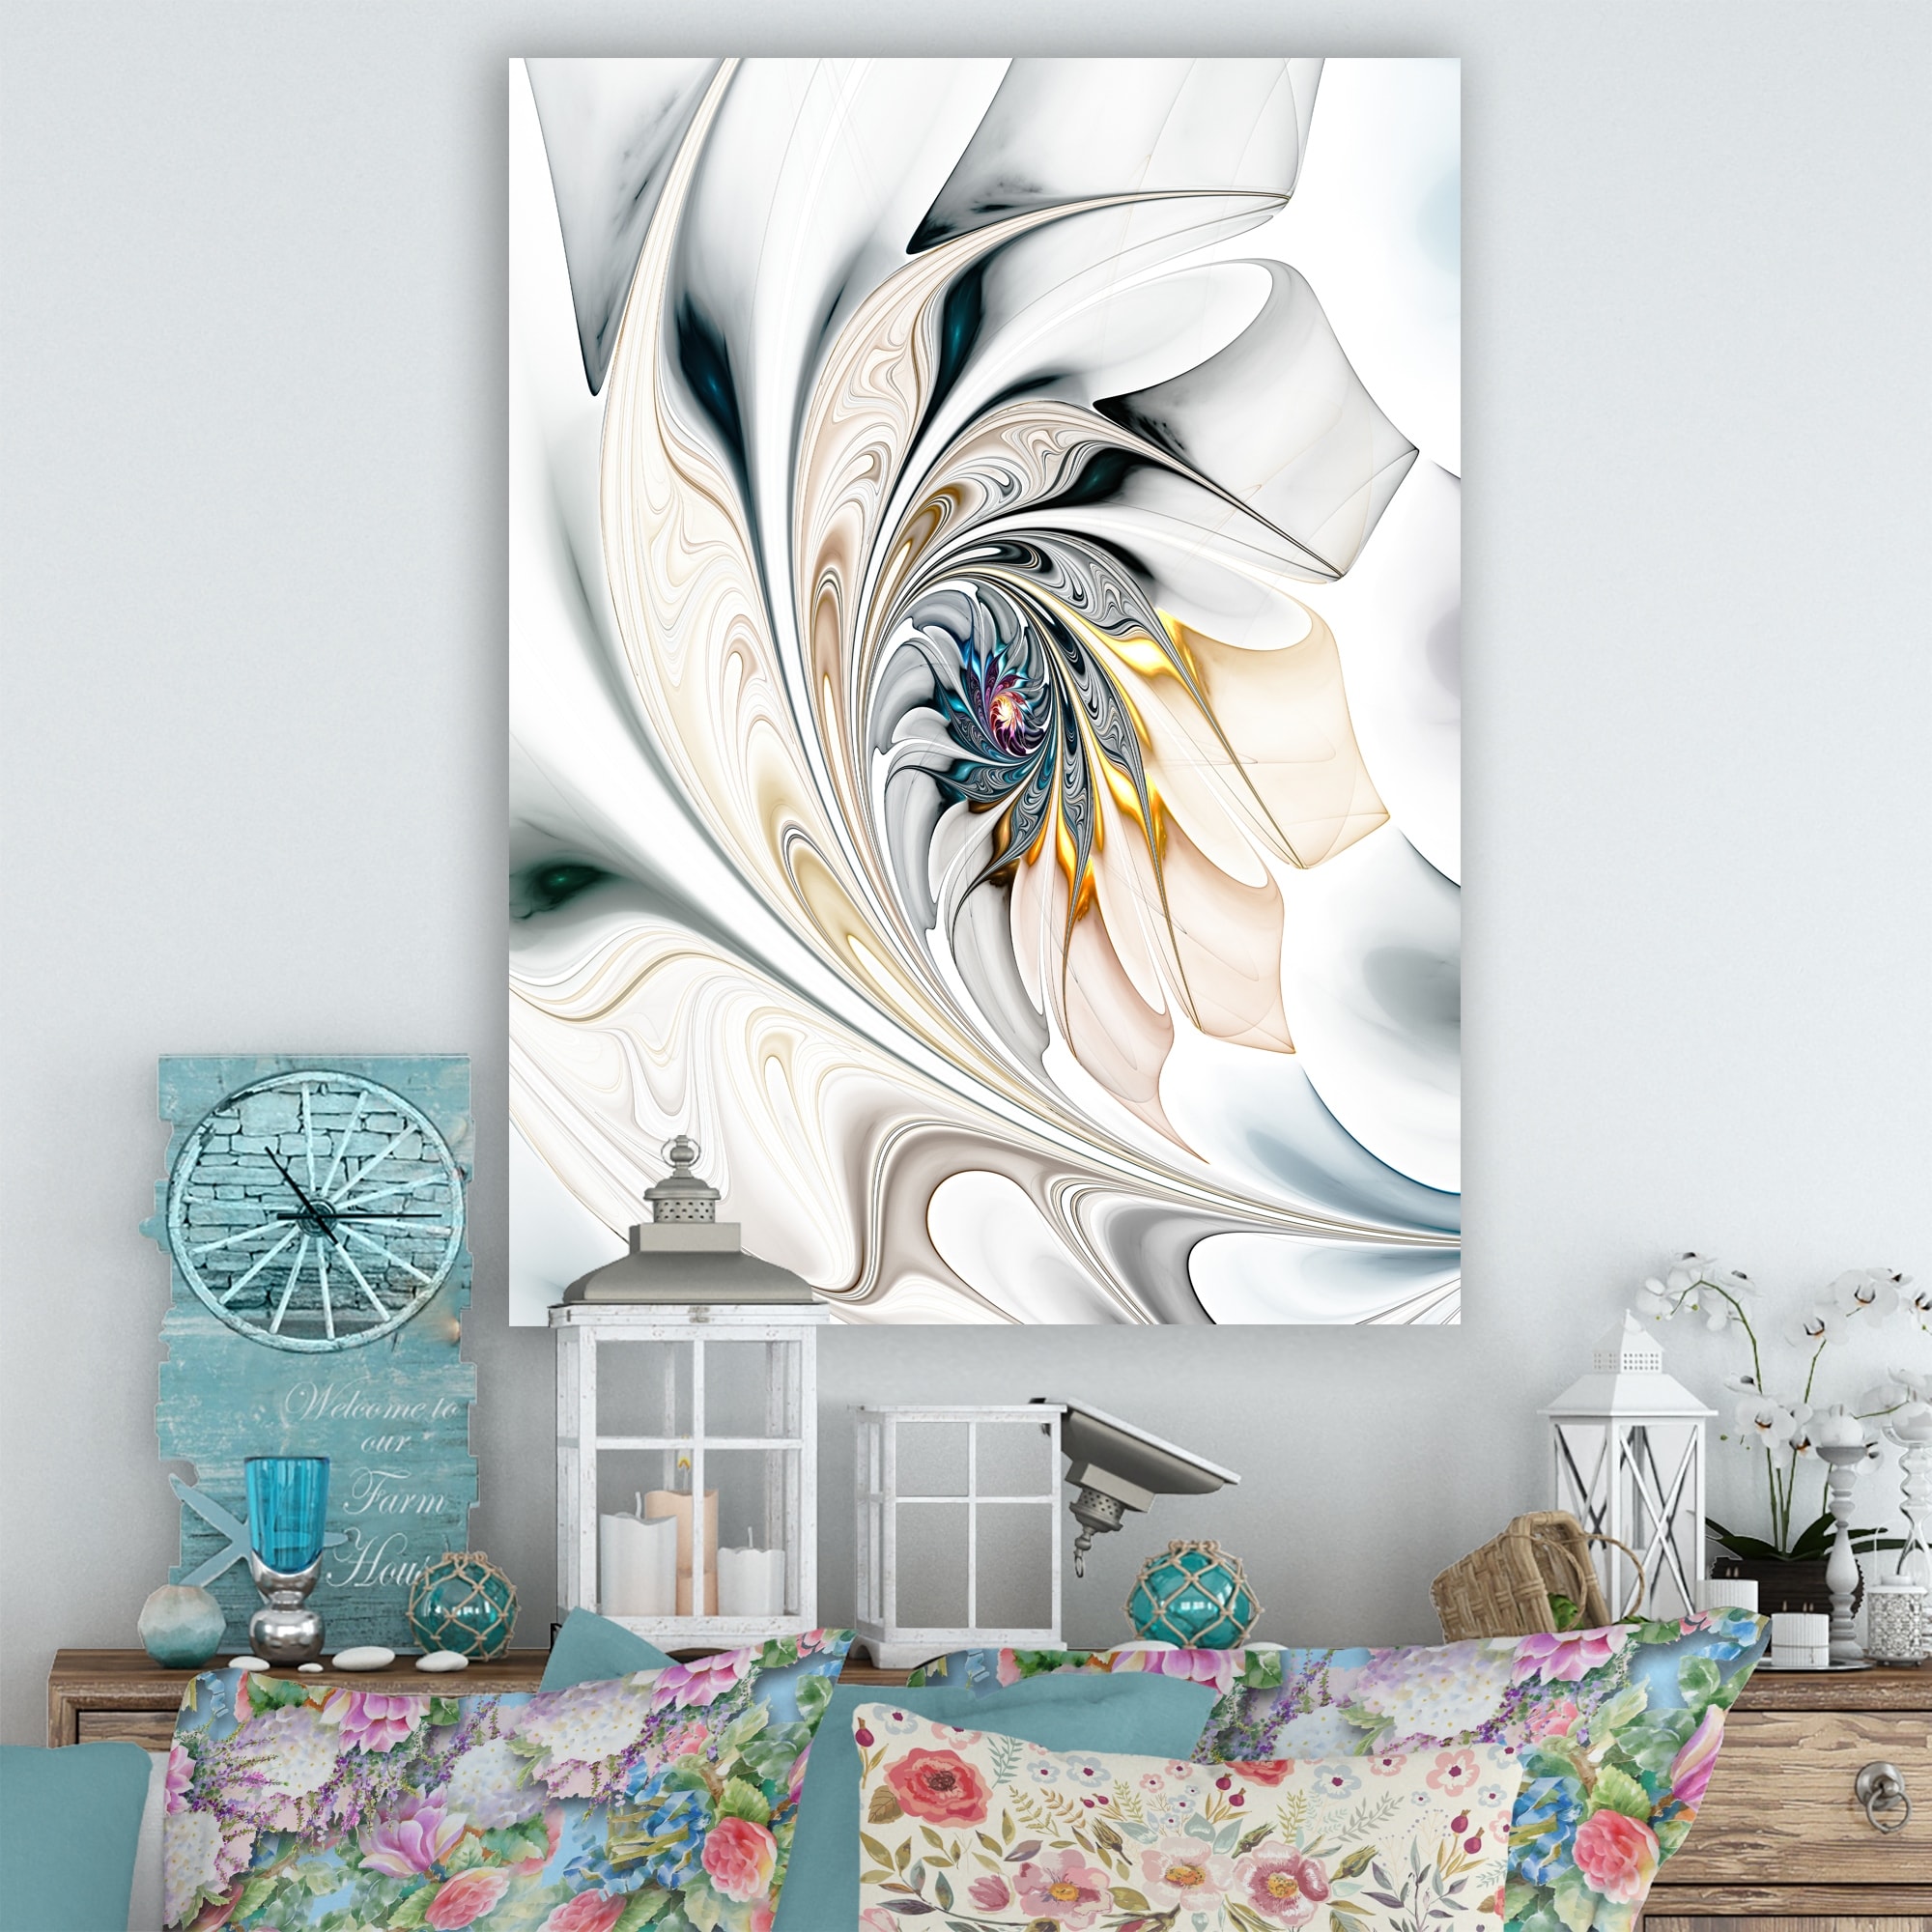 White Stained Glass Large Floral Wall Art Canvas On Sale Bed Bath   Beyond 12417295